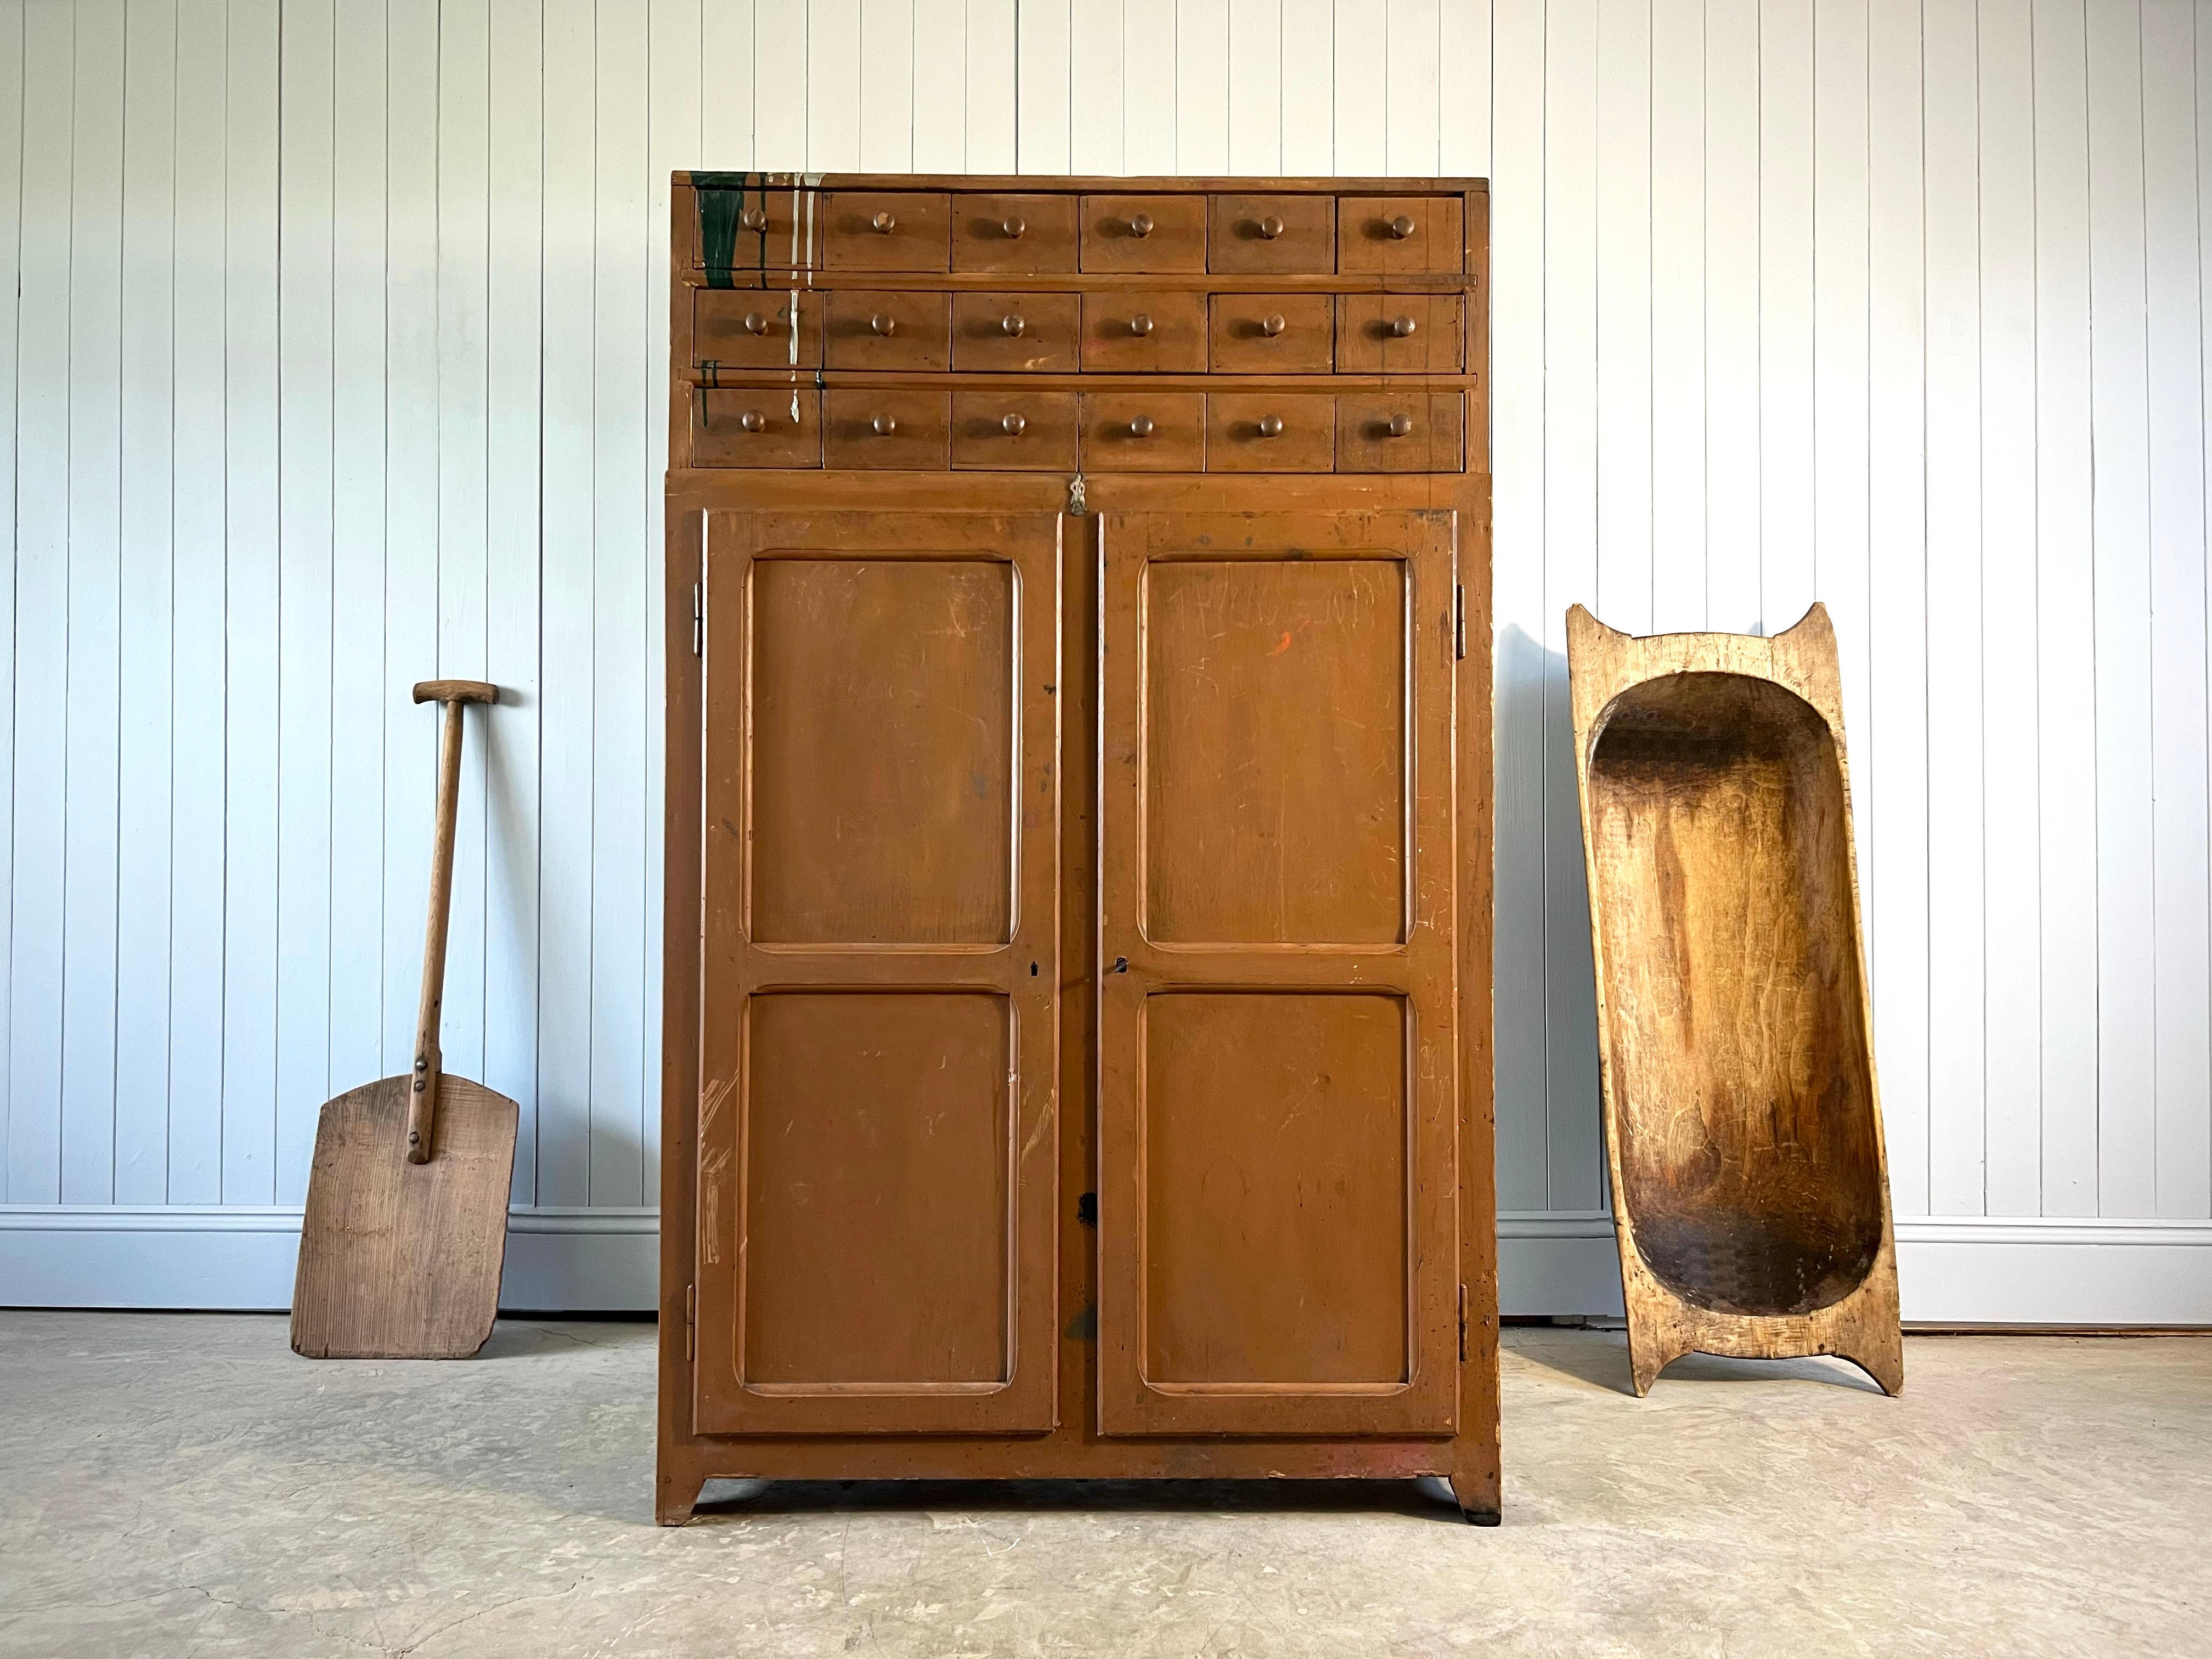 This industrial cupboard is early 20th century from the Alsace region of France.  We know this because of the little lead figure nailed to the front which is typical of the region.

Lovely to have some industrial pieces in stock.  We have kept this